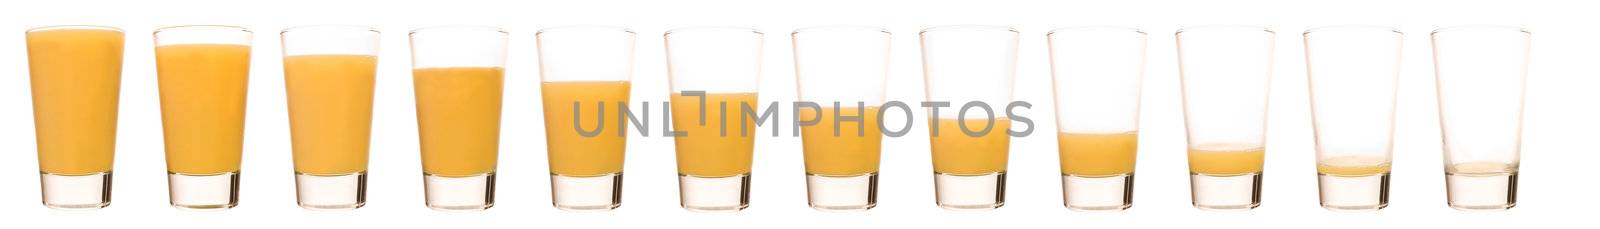 Time Lapse of a glass of Orange juice